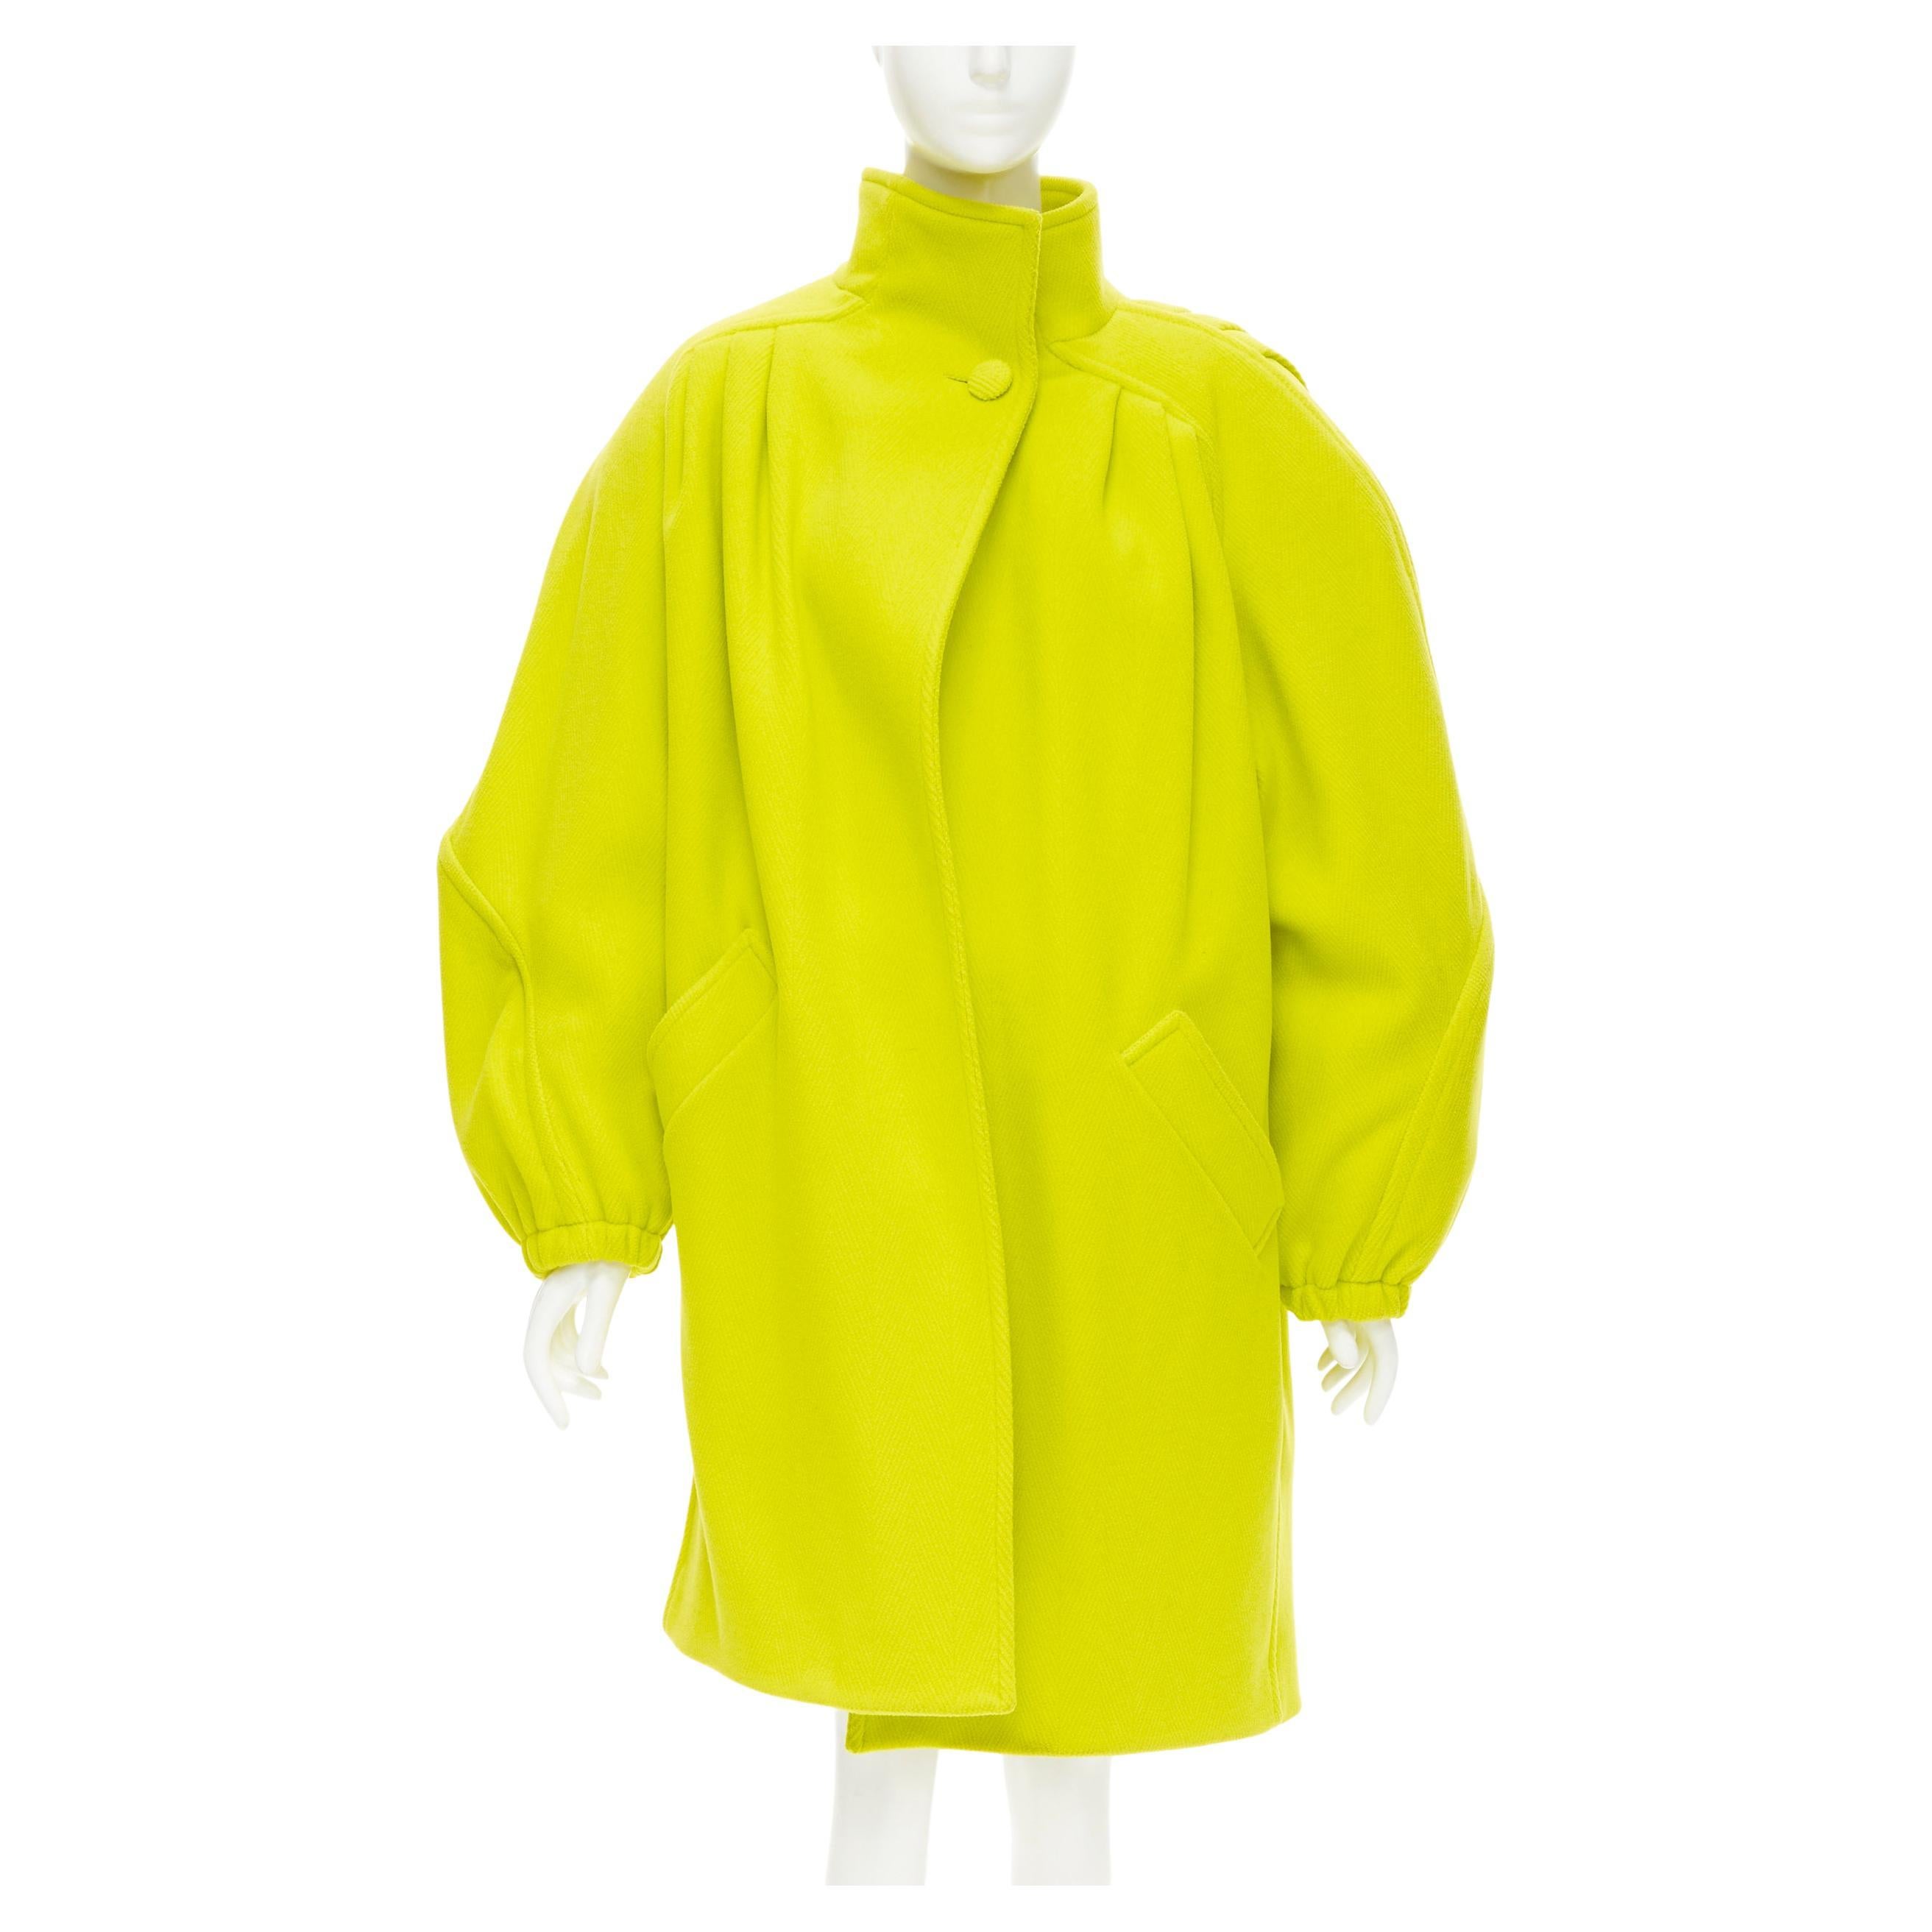 Double Ring Glossy Cocoon Coat - Women - Ready-to-Wear